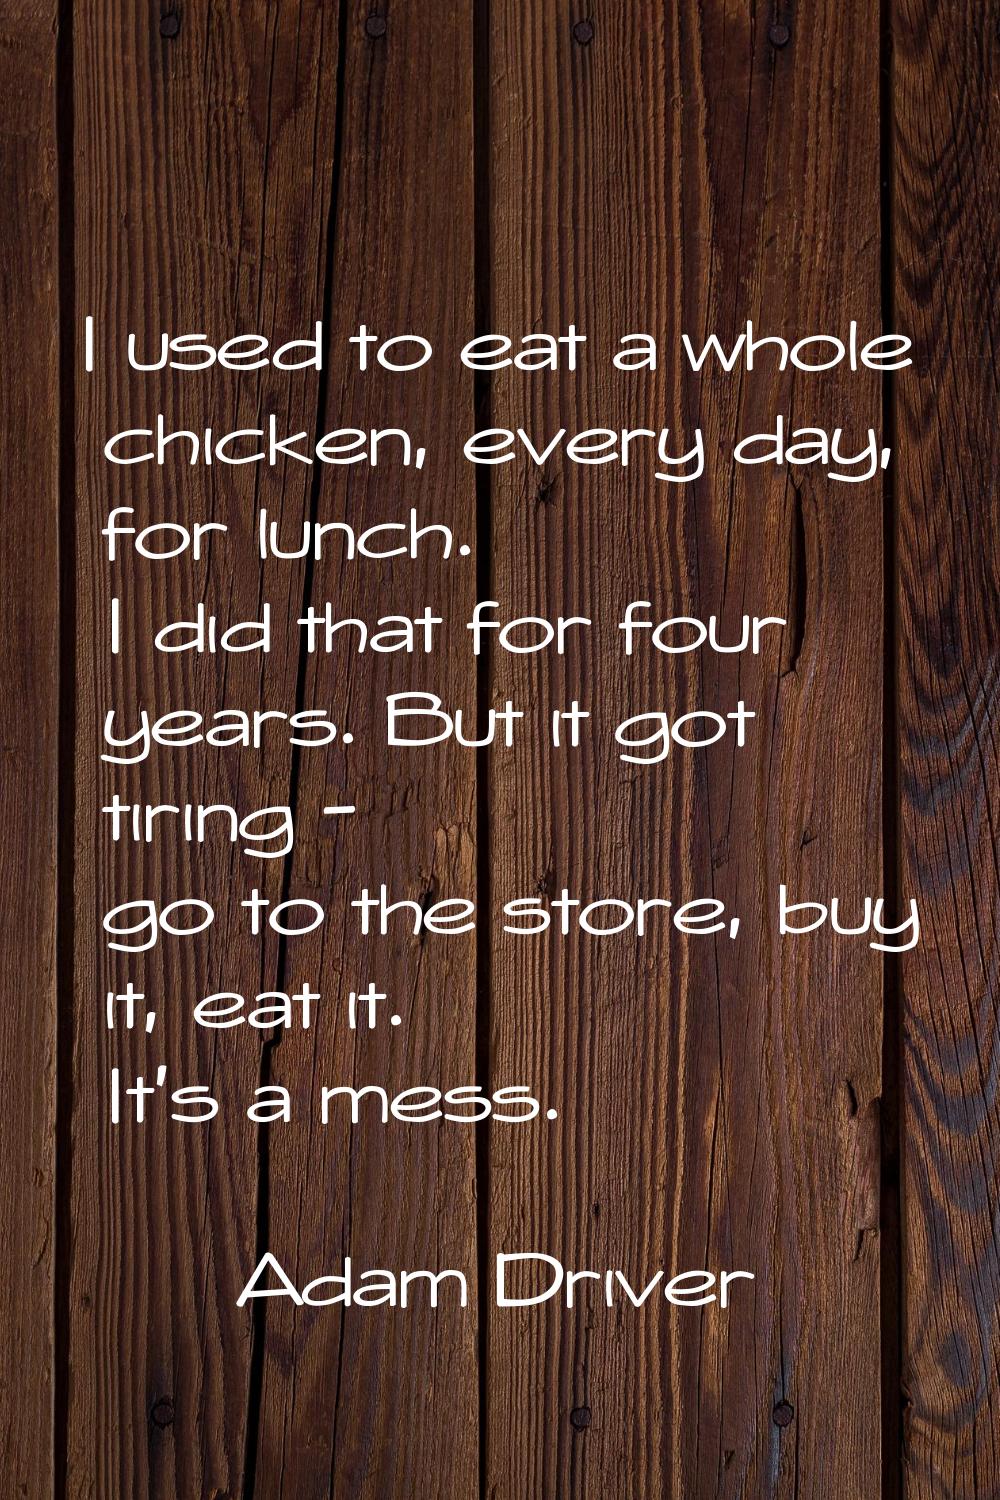 I used to eat a whole chicken, every day, for lunch. I did that for four years. But it got tiring -